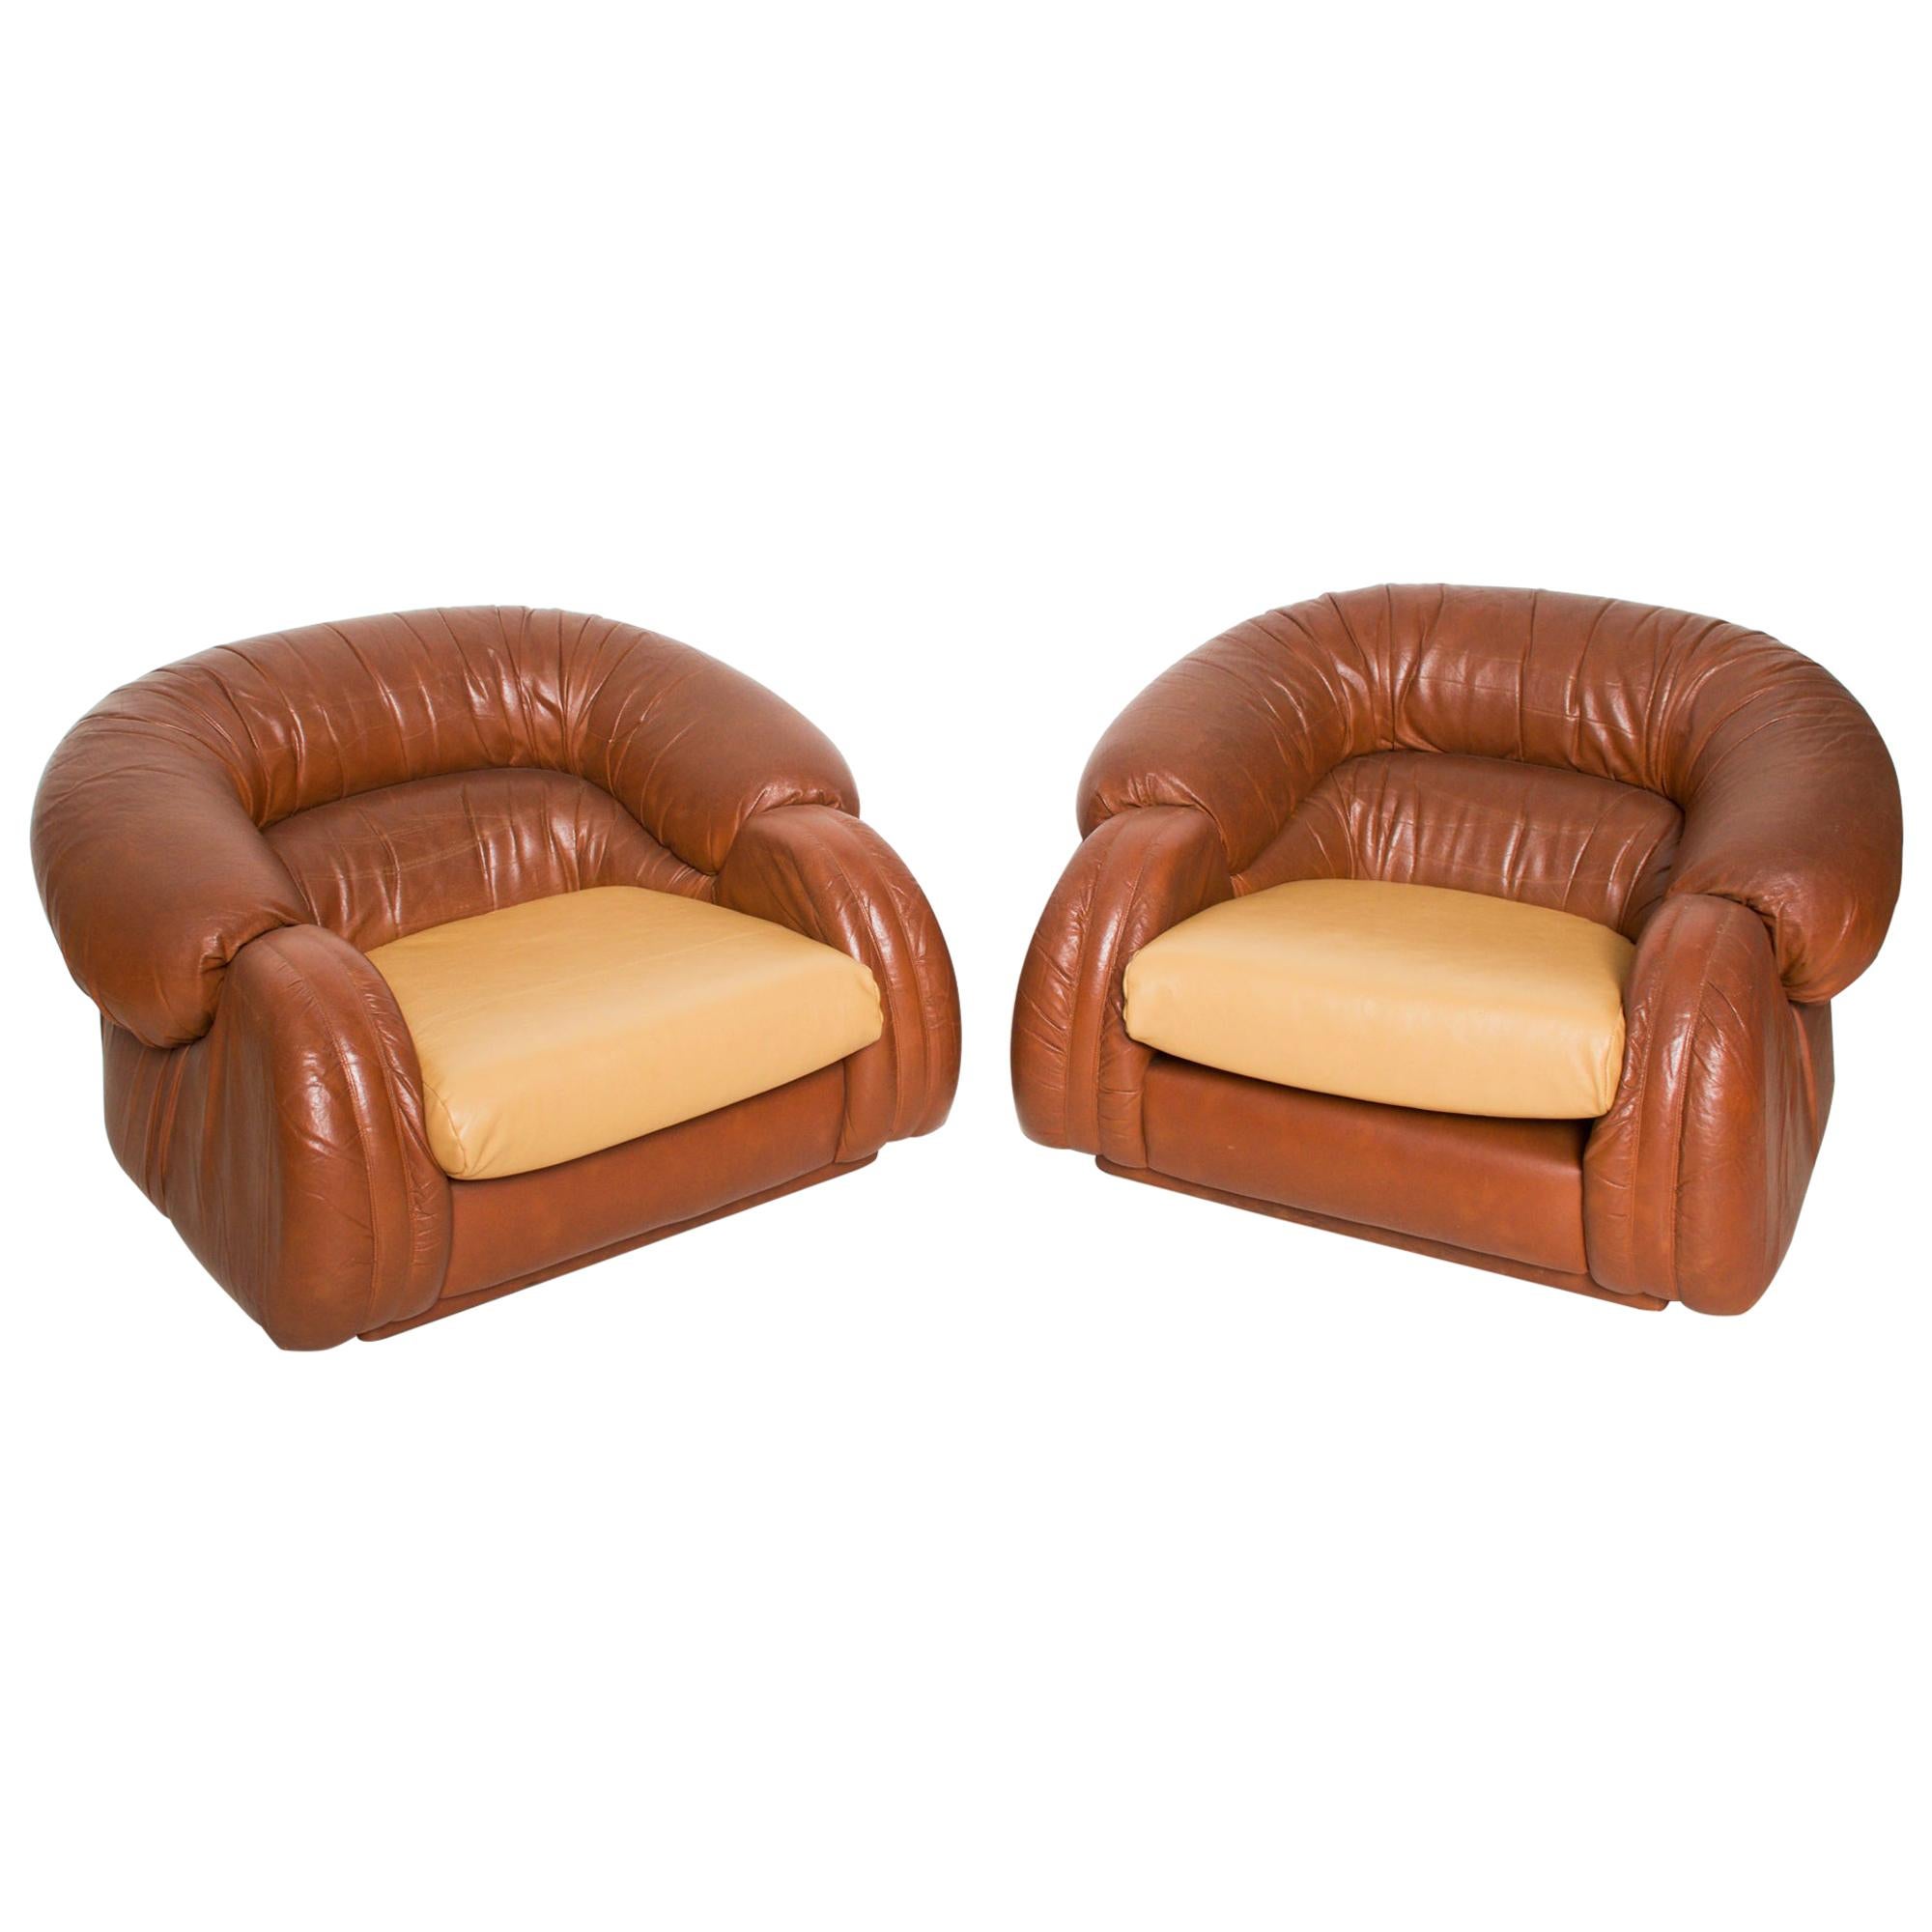 Poltrona Italy Comfy Leather Lounge, Comfy Leather Chairs